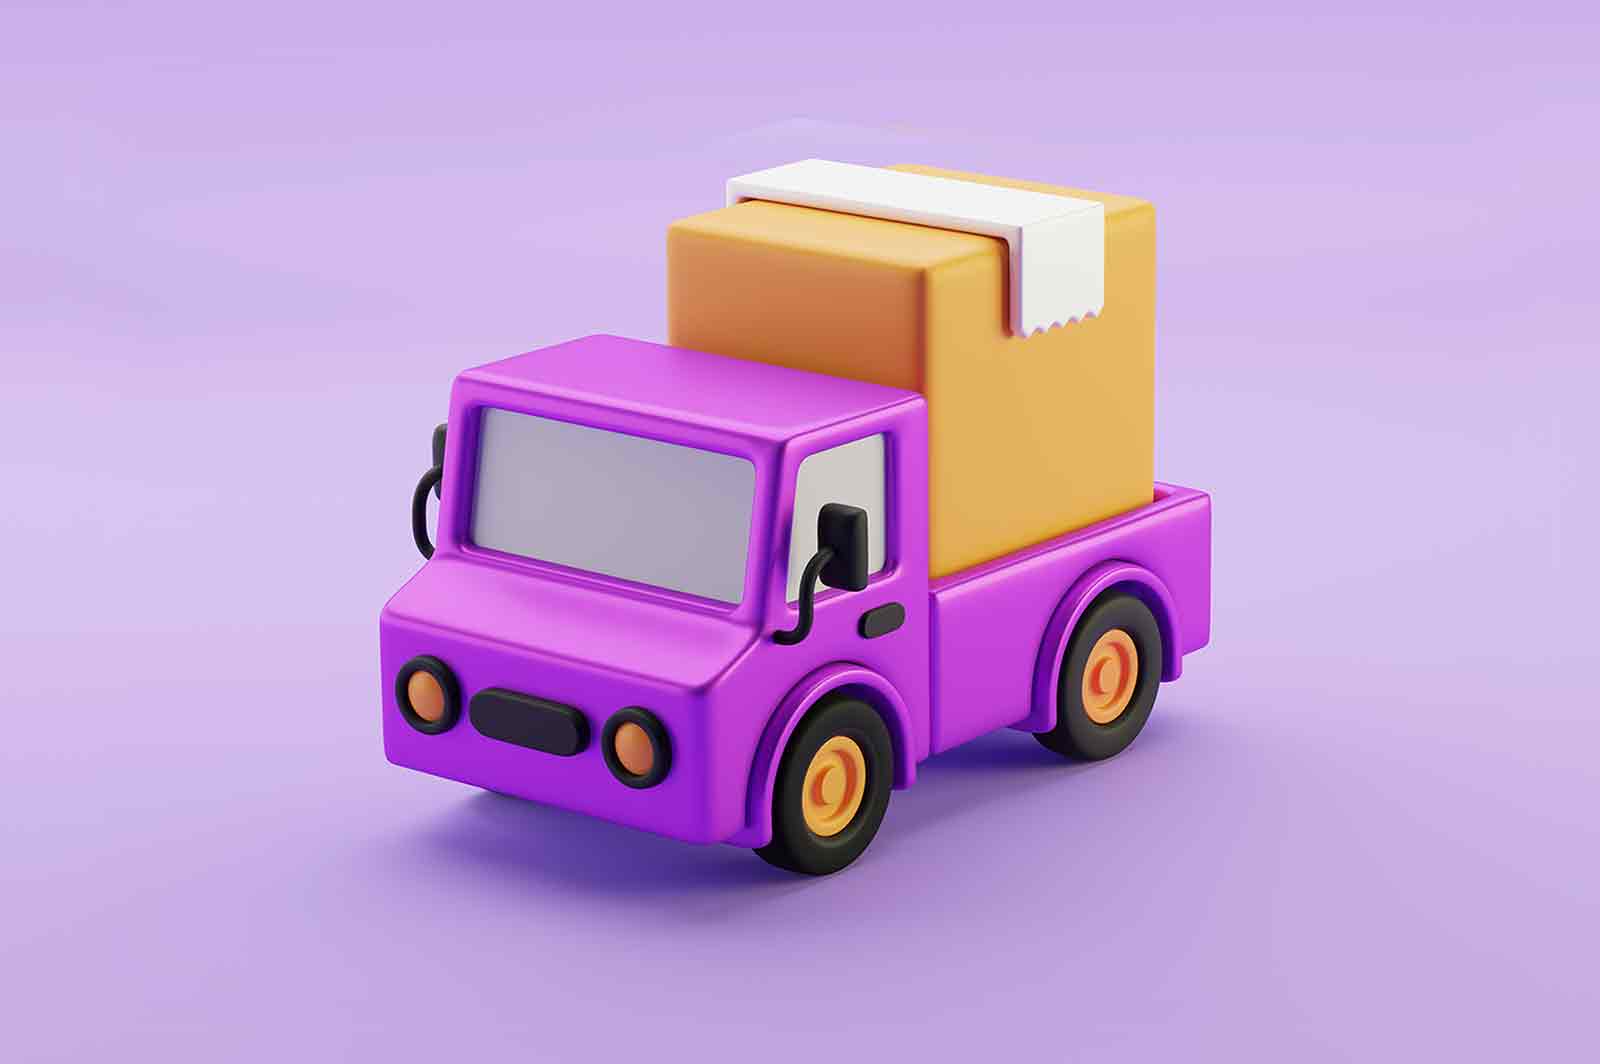 Fast delivery truck 3d rendered icon illustration. Express delivery service, shipping, truck with box and quick move concept